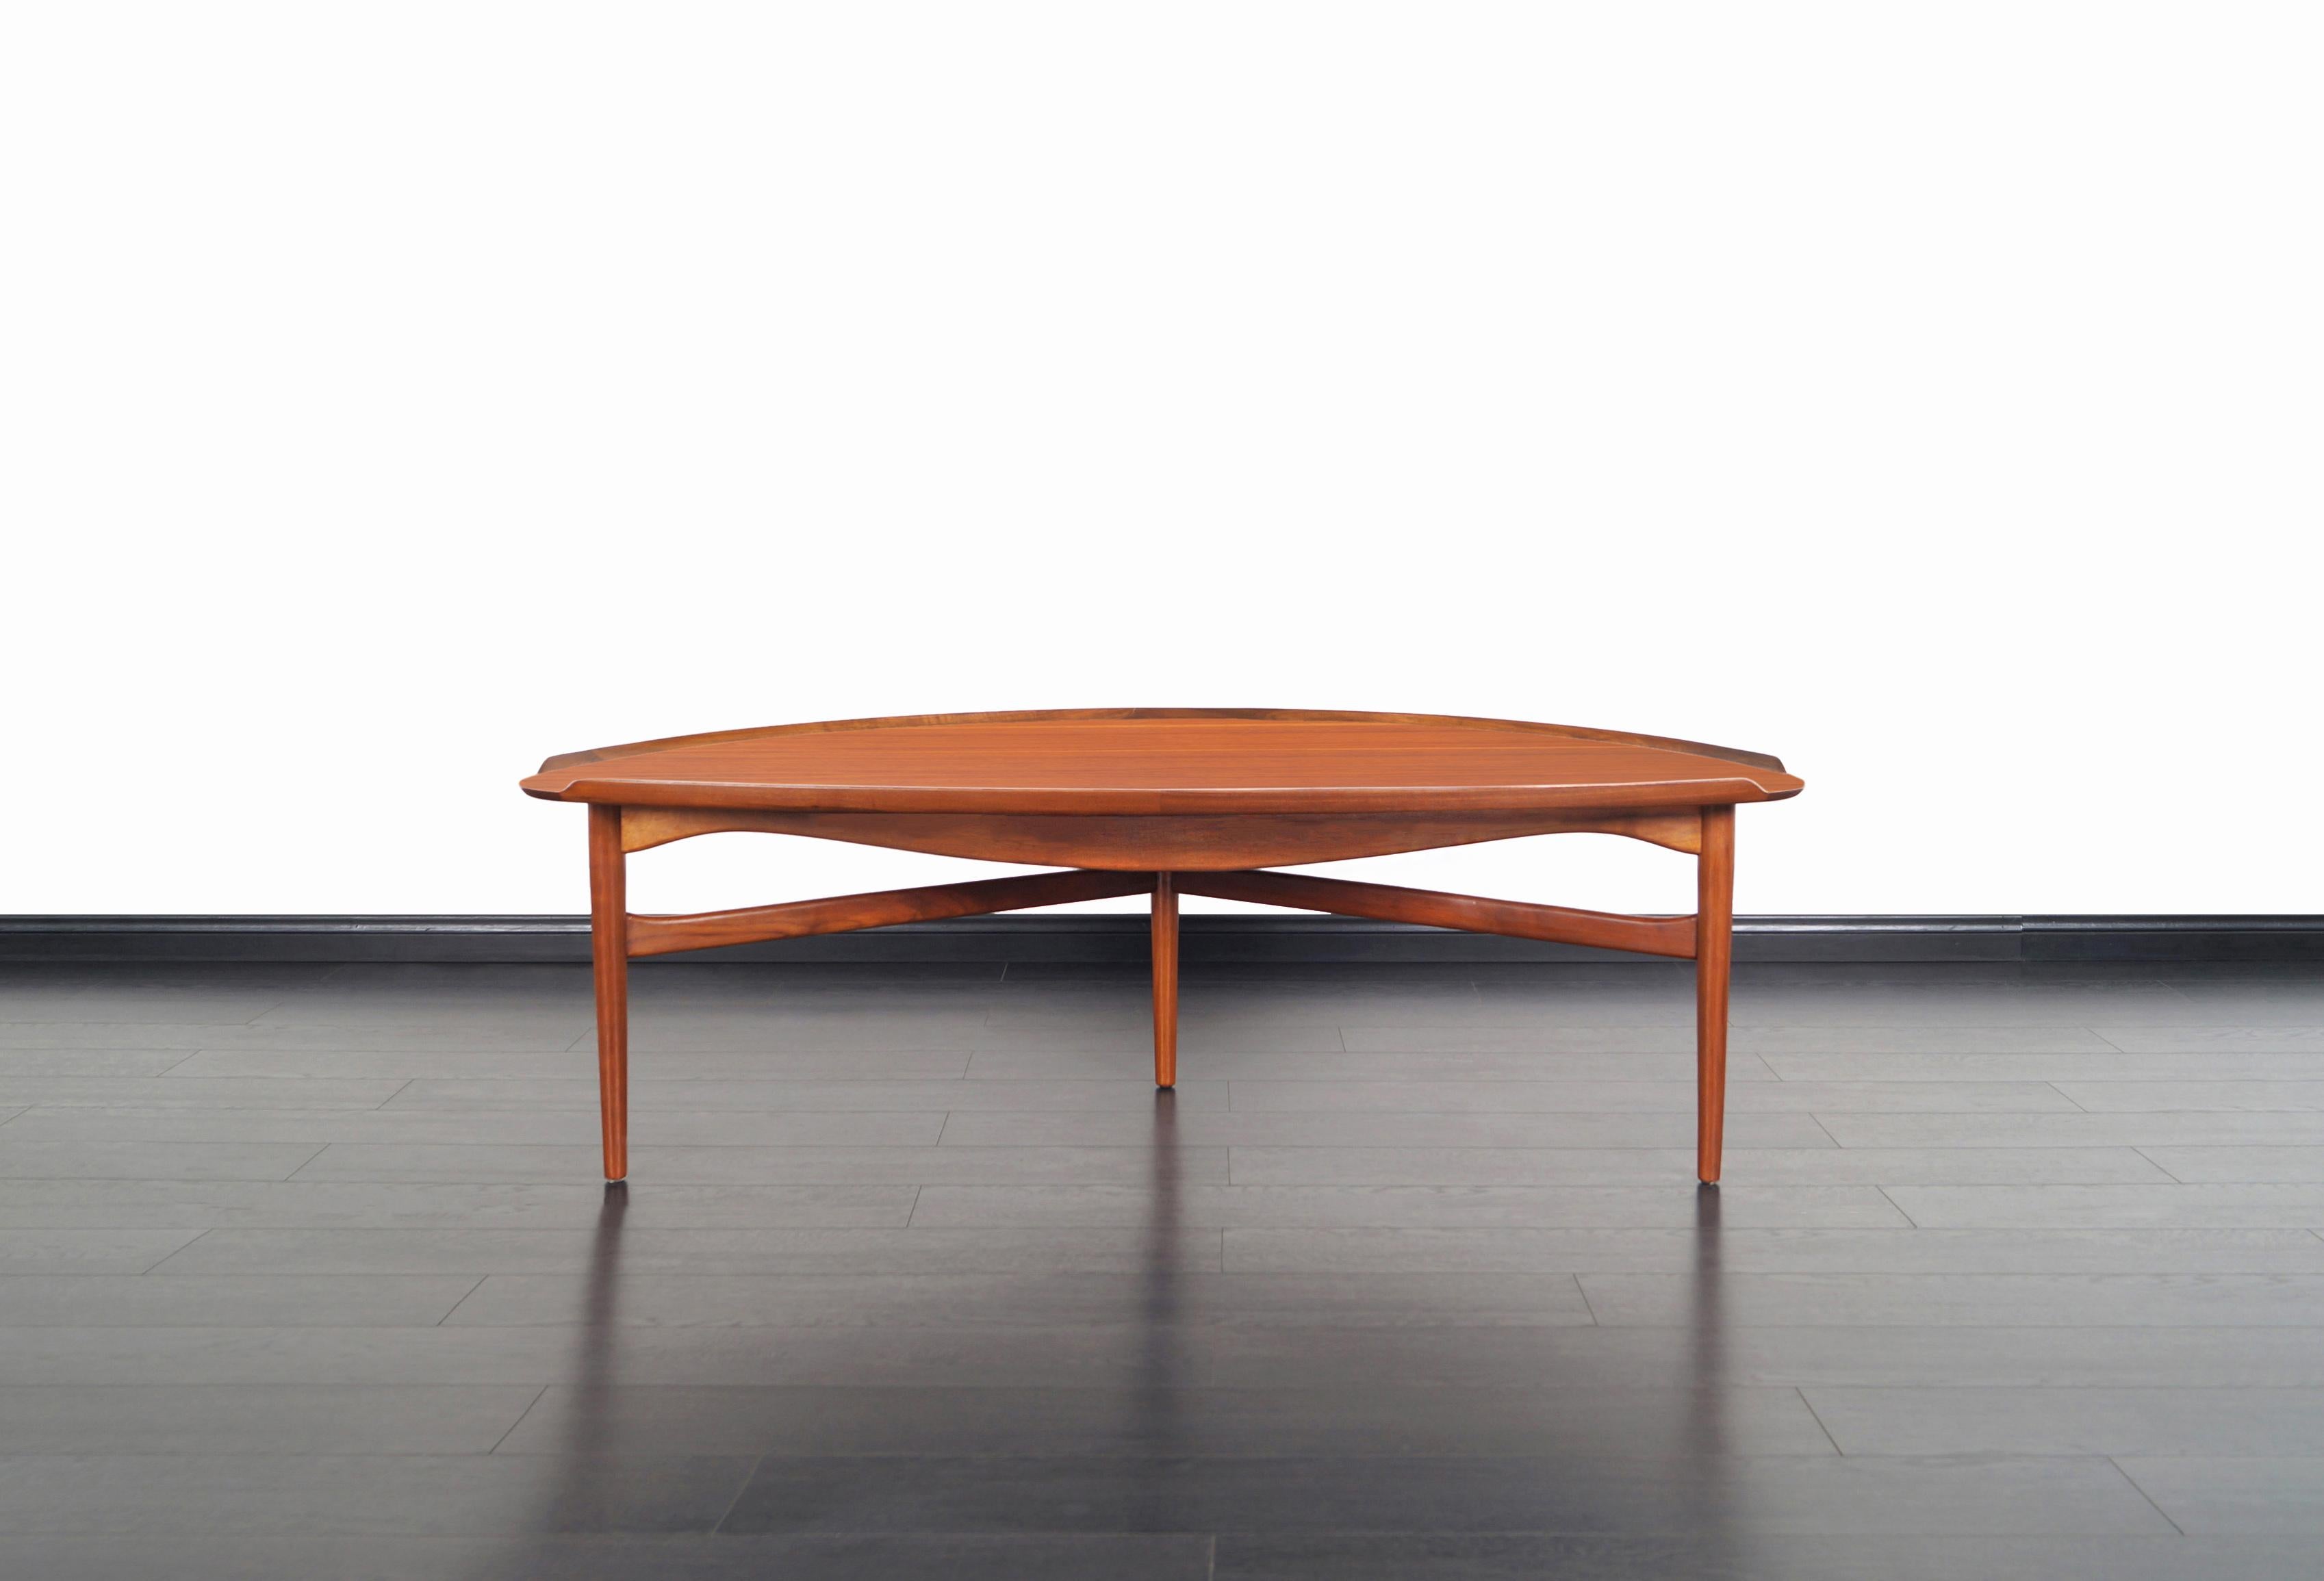 Beautiful Danish modern walnut cocktail table designed by iconic designer Finn Juhl for Baker Furniture in the United States, circa 1950s. This cocktail table has a sculptural design with no sharp corners that allow you to move freely around it. It